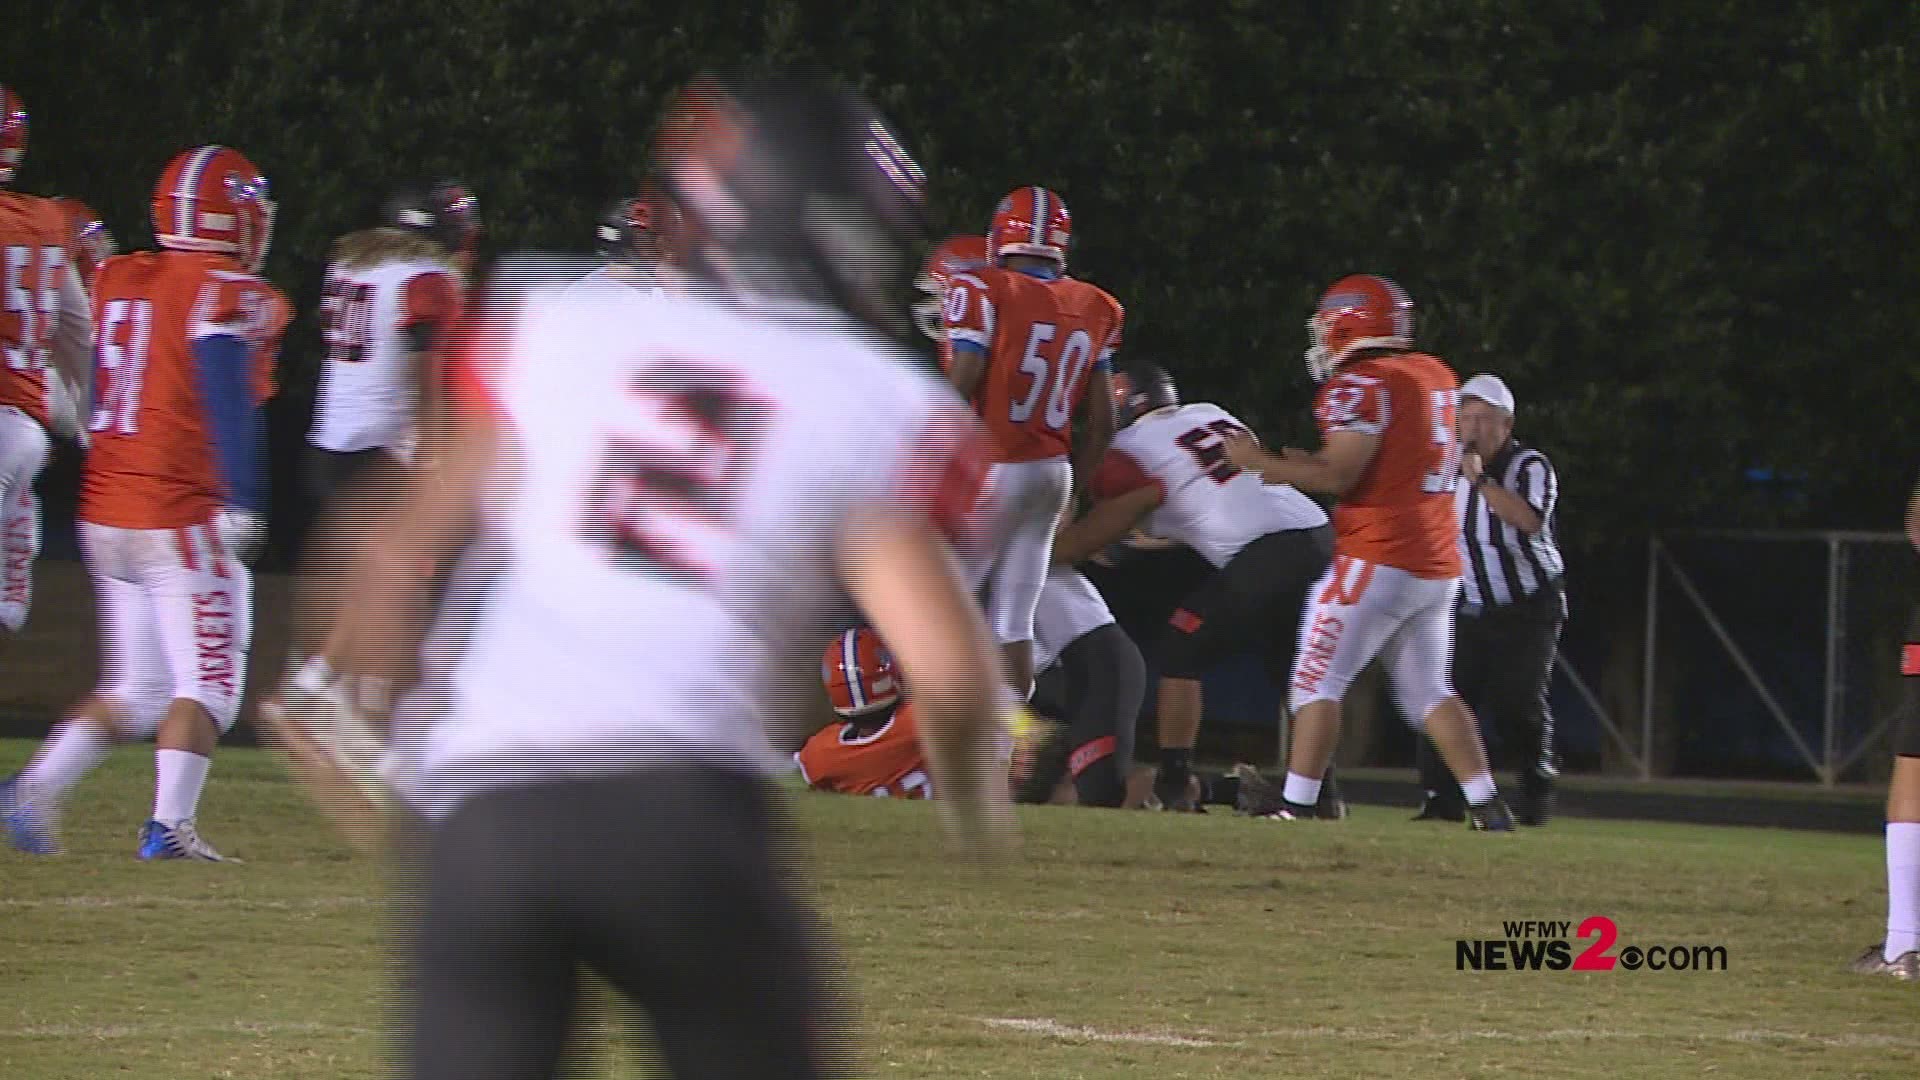 Some Friday Football Highlights from the Lexington vs North Davidson game.  North Davidson wins 27-0